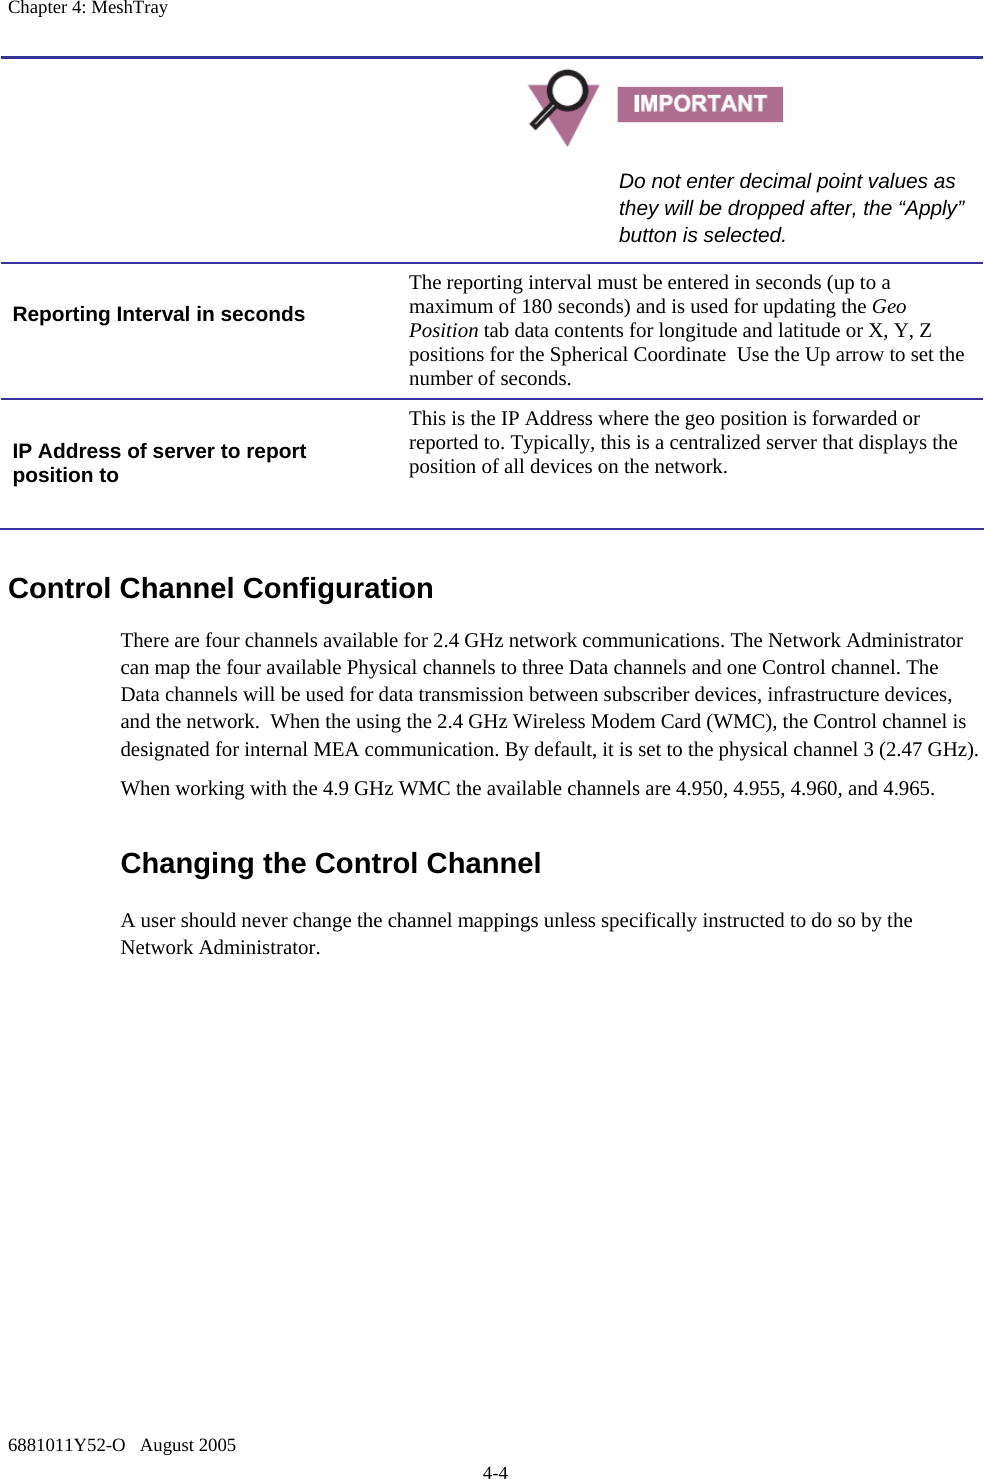 Chapter 4: MeshTray 6881011Y52-O   August 2005 4-4 Control Channel Configuration There are four channels available for 2.4 GHz network communications. The Network Administrator can map the four available Physical channels to three Data channels and one Control channel. The Data channels will be used for data transmission between subscriber devices, infrastructure devices, and the network.  When the using the 2.4 GHz Wireless Modem Card (WMC), the Control channel is designated for internal MEA communication. By default, it is set to the physical channel 3 (2.47 GHz). When working with the 4.9 GHz WMC the available channels are 4.950, 4.955, 4.960, and 4.965. Changing the Control Channel  A user should never change the channel mappings unless specifically instructed to do so by the Network Administrator.    Do not enter decimal point values as they will be dropped after, the “Apply” button is selected.  Reporting Interval in seconds  The reporting interval must be entered in seconds (up to a maximum of 180 seconds) and is used for updating the Geo Position tab data contents for longitude and latitude or X, Y, Z positions for the Spherical Coordinate  Use the Up arrow to set the number of seconds.  IP Address of server to report position to  This is the IP Address where the geo position is forwarded or reported to. Typically, this is a centralized server that displays the position of all devices on the network. 